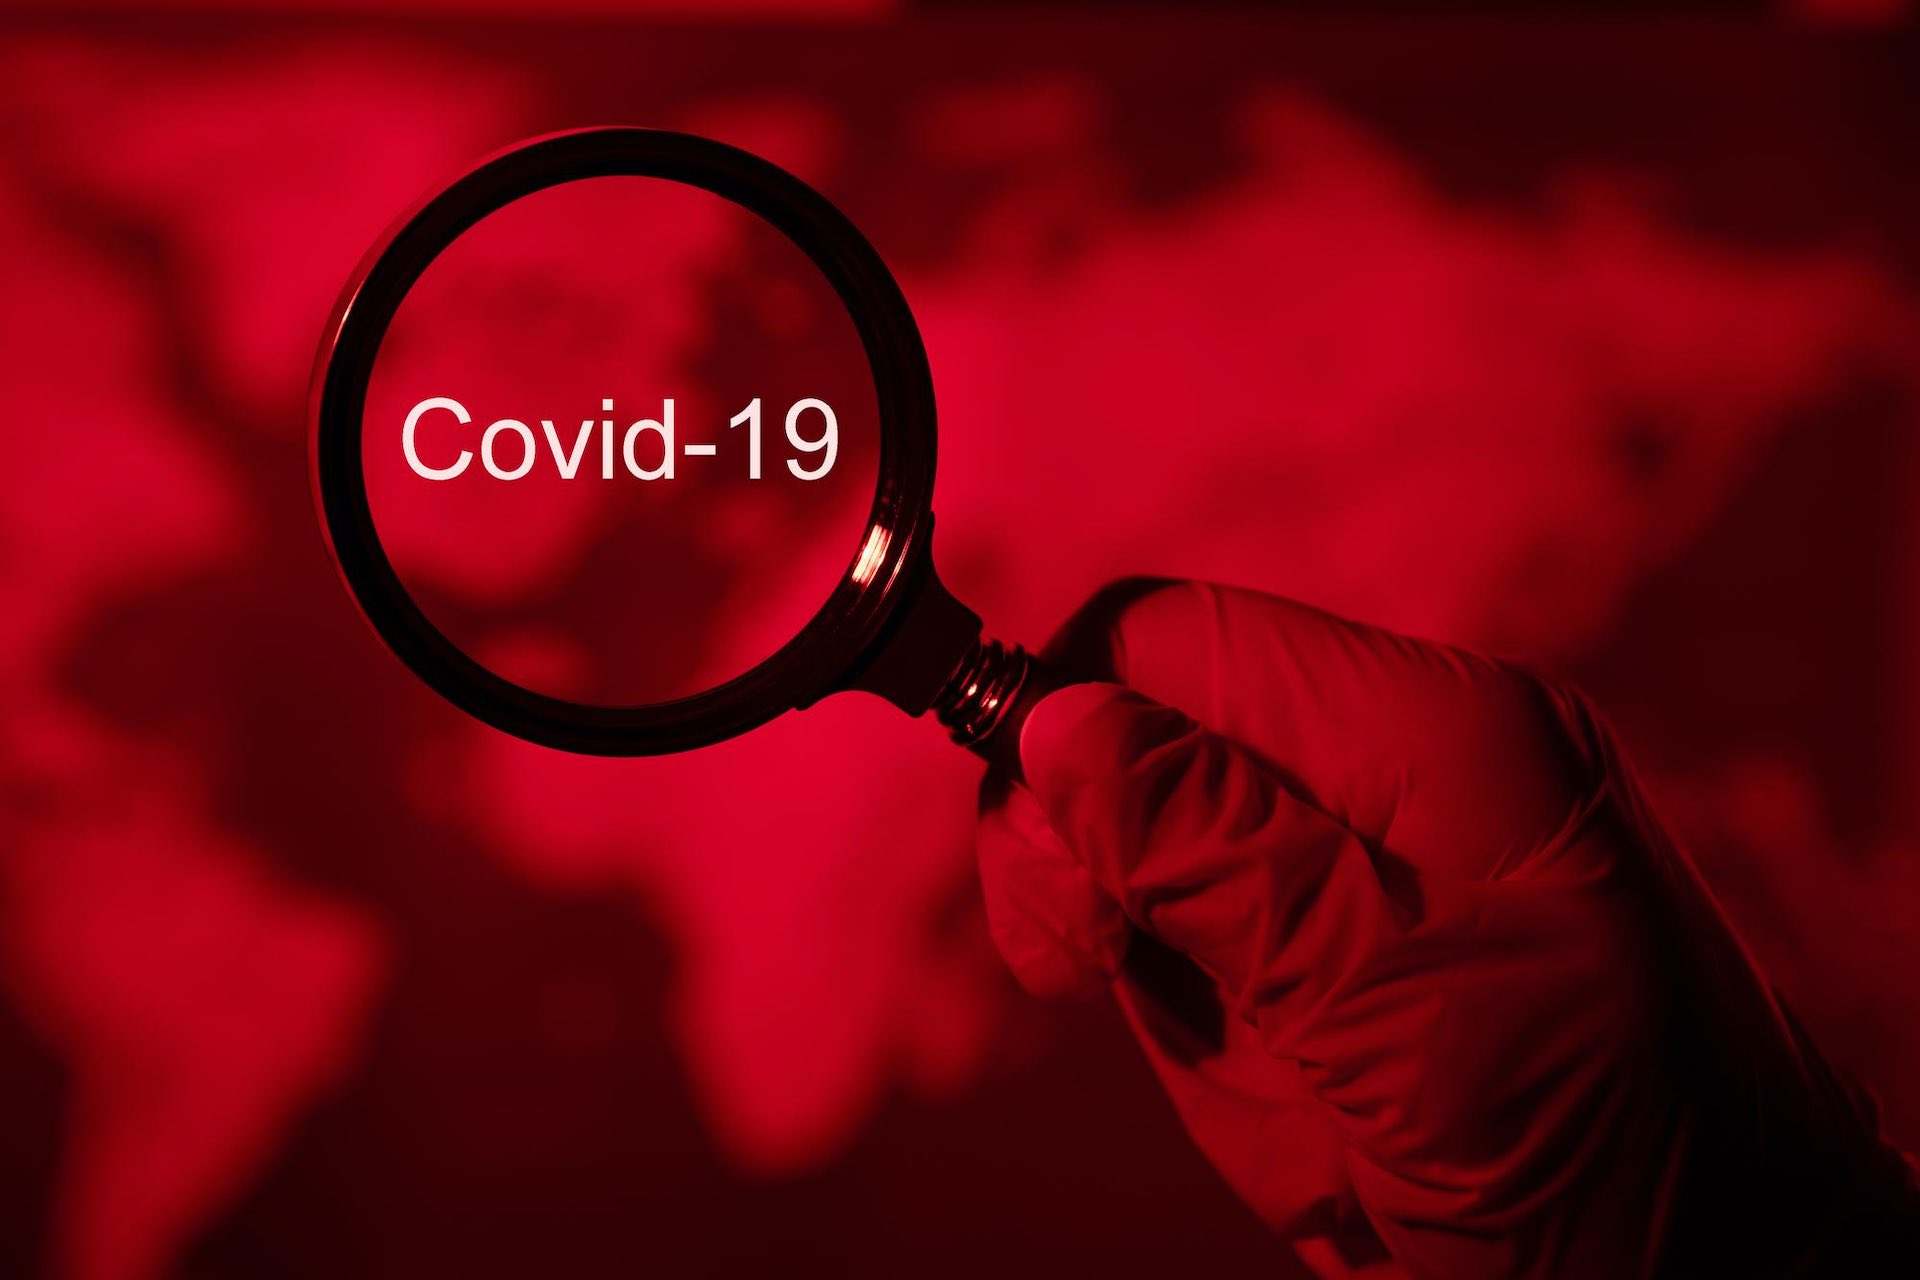 One million deaths reported from COVID-19 worldwide in 2022 - WHO